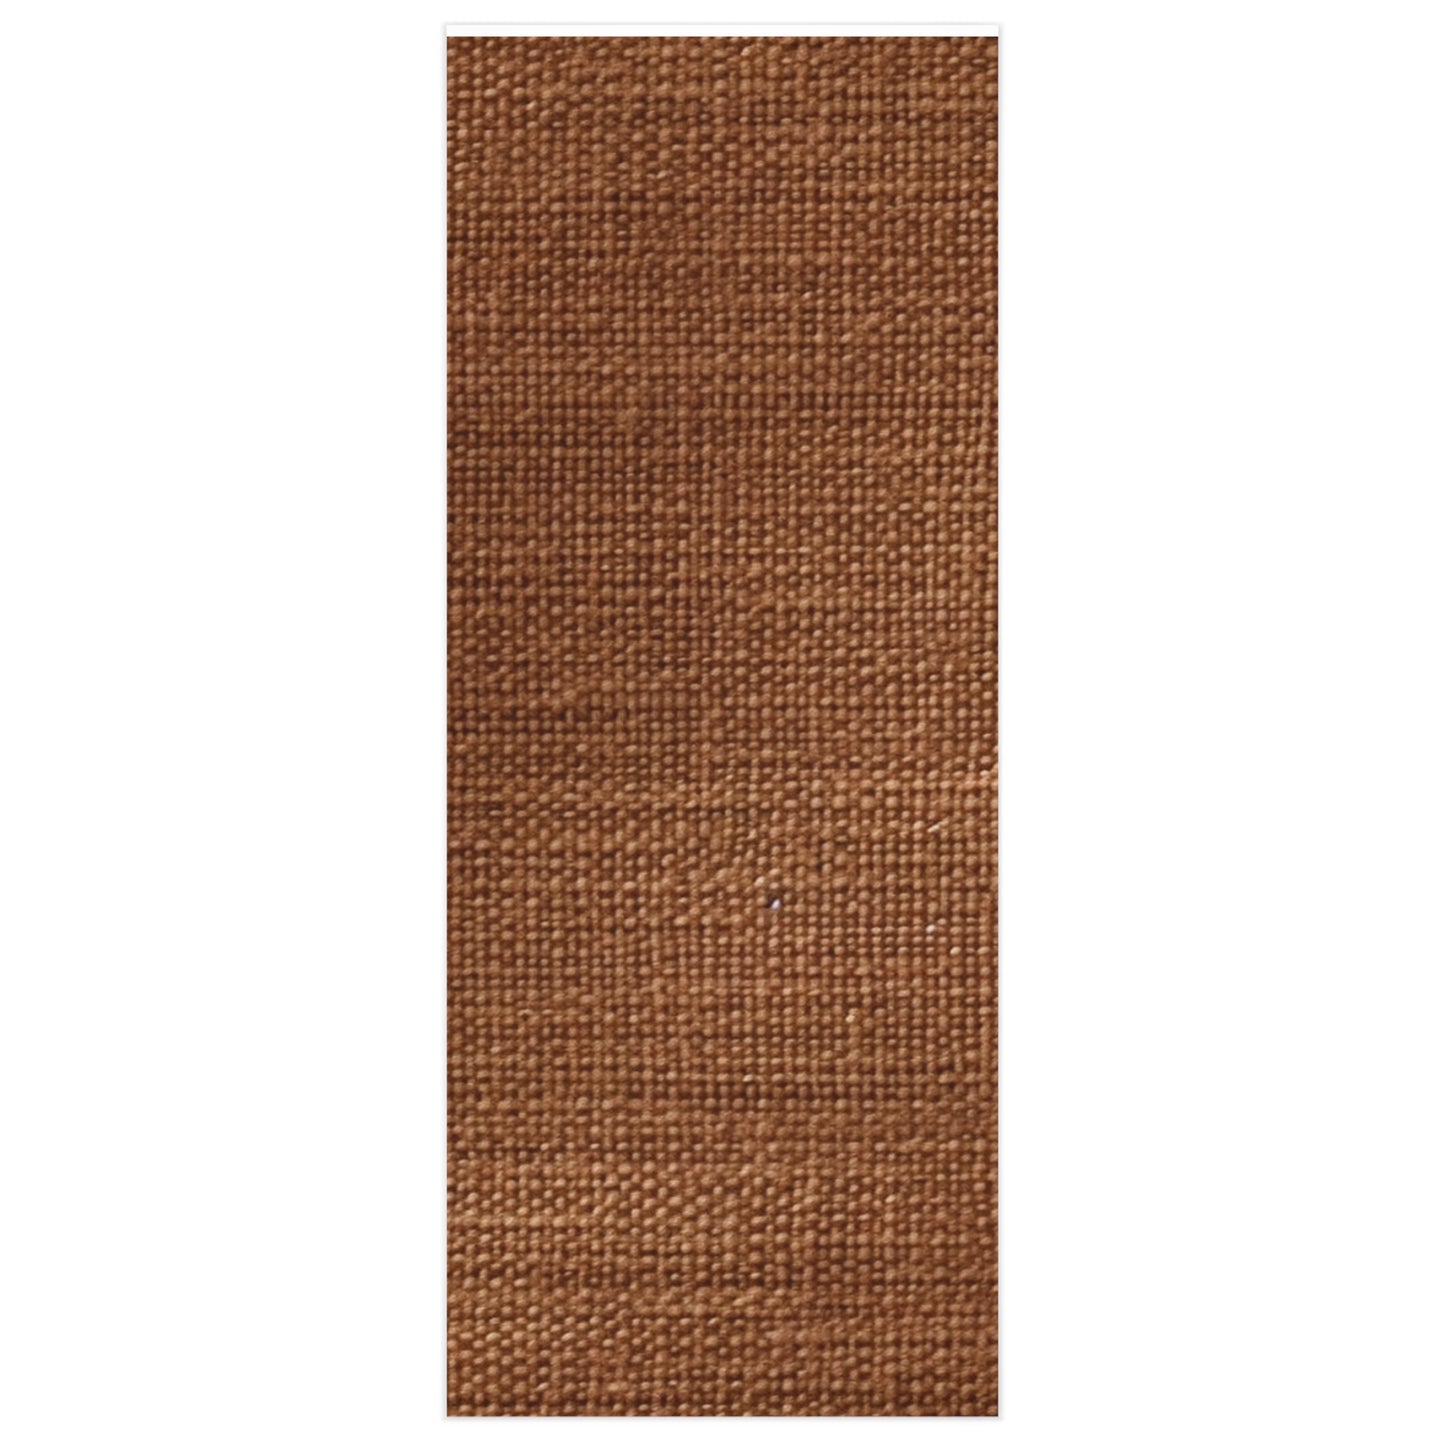 Luxe Dark Brown: Denim-Inspired, Distinctively Textured Fabric - Wrapping Paper